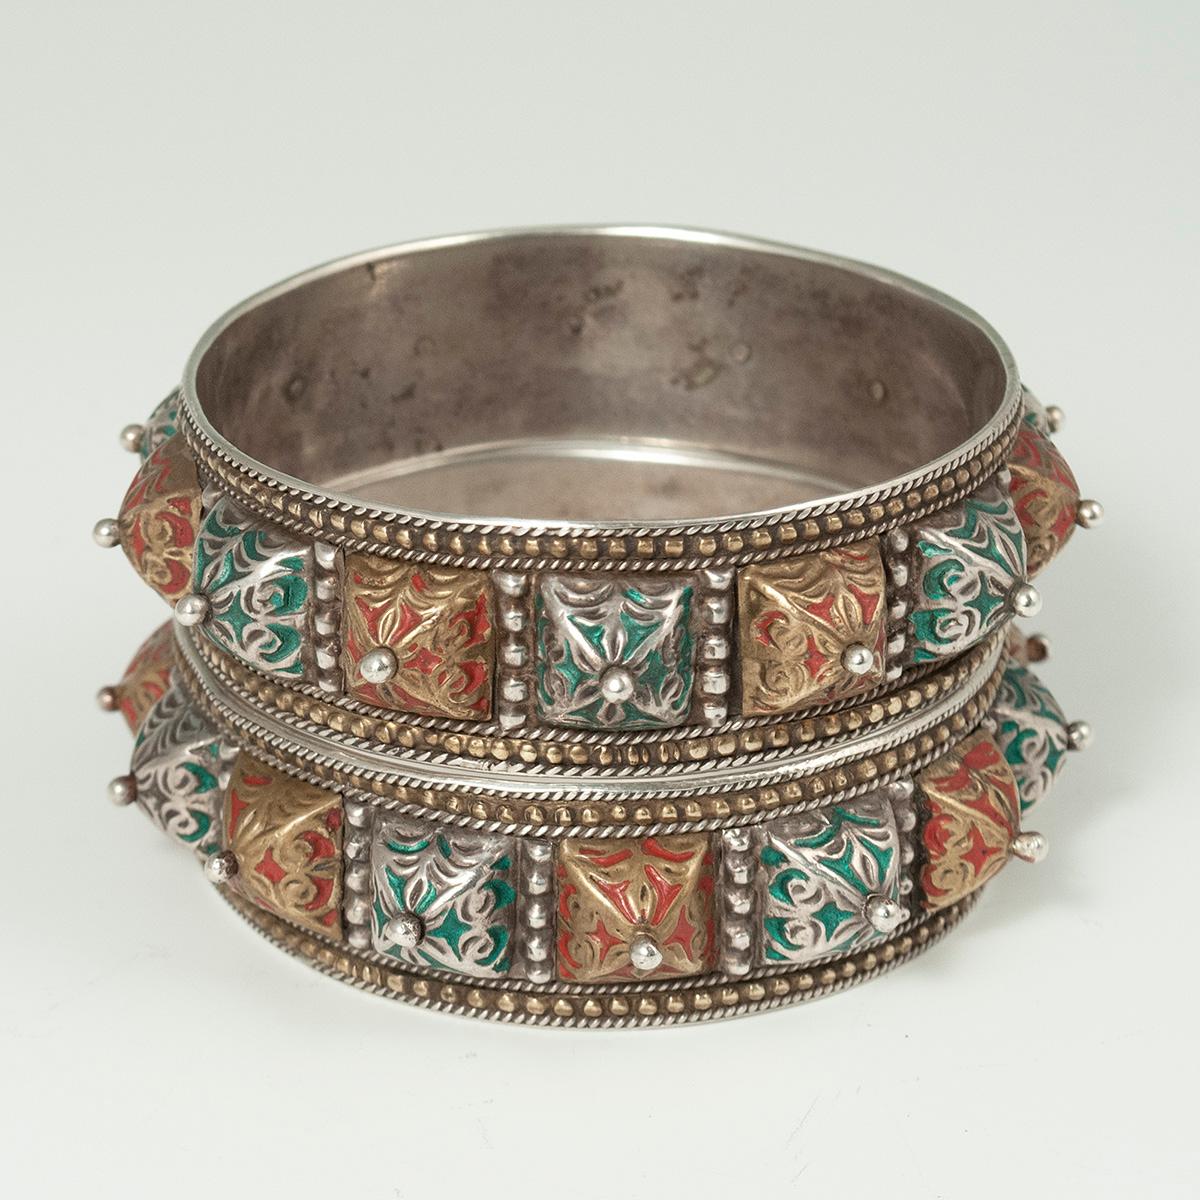 20th century pair of enamel and silver bracelets, Morocco

A beautiful pair of enamel and silver bracelets from Morocco. There may be a little gilding on the red enameled pyramidal bumps and on the raised dots along the edges.
The inner